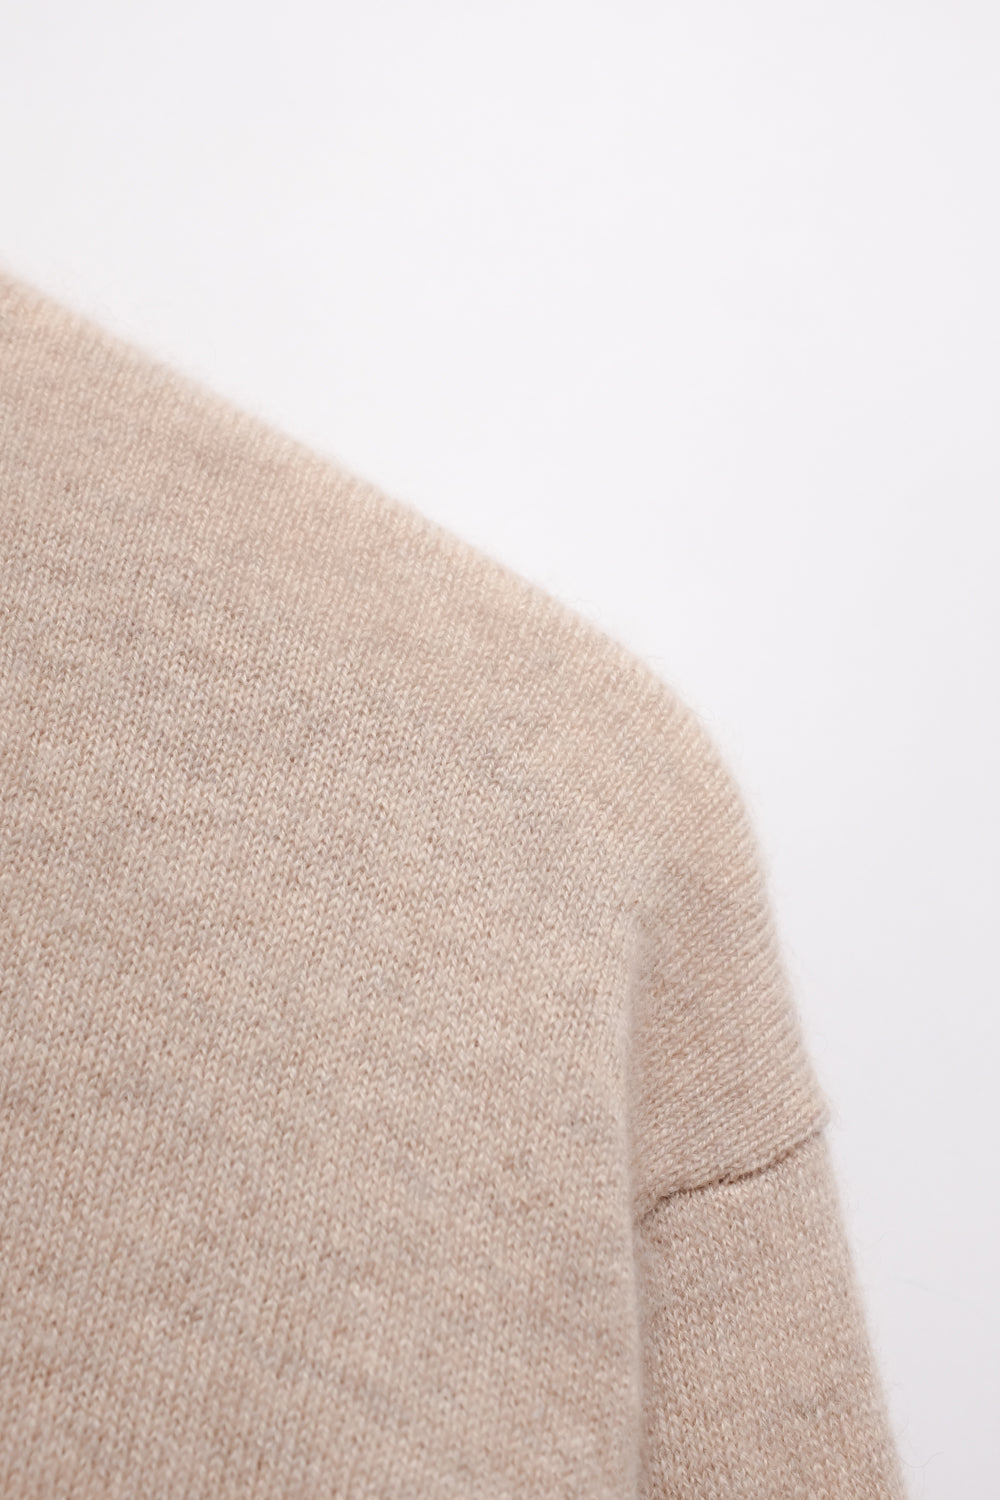 PURE CASHMERE ITALY BEIGE OVERSIZE SWEATER